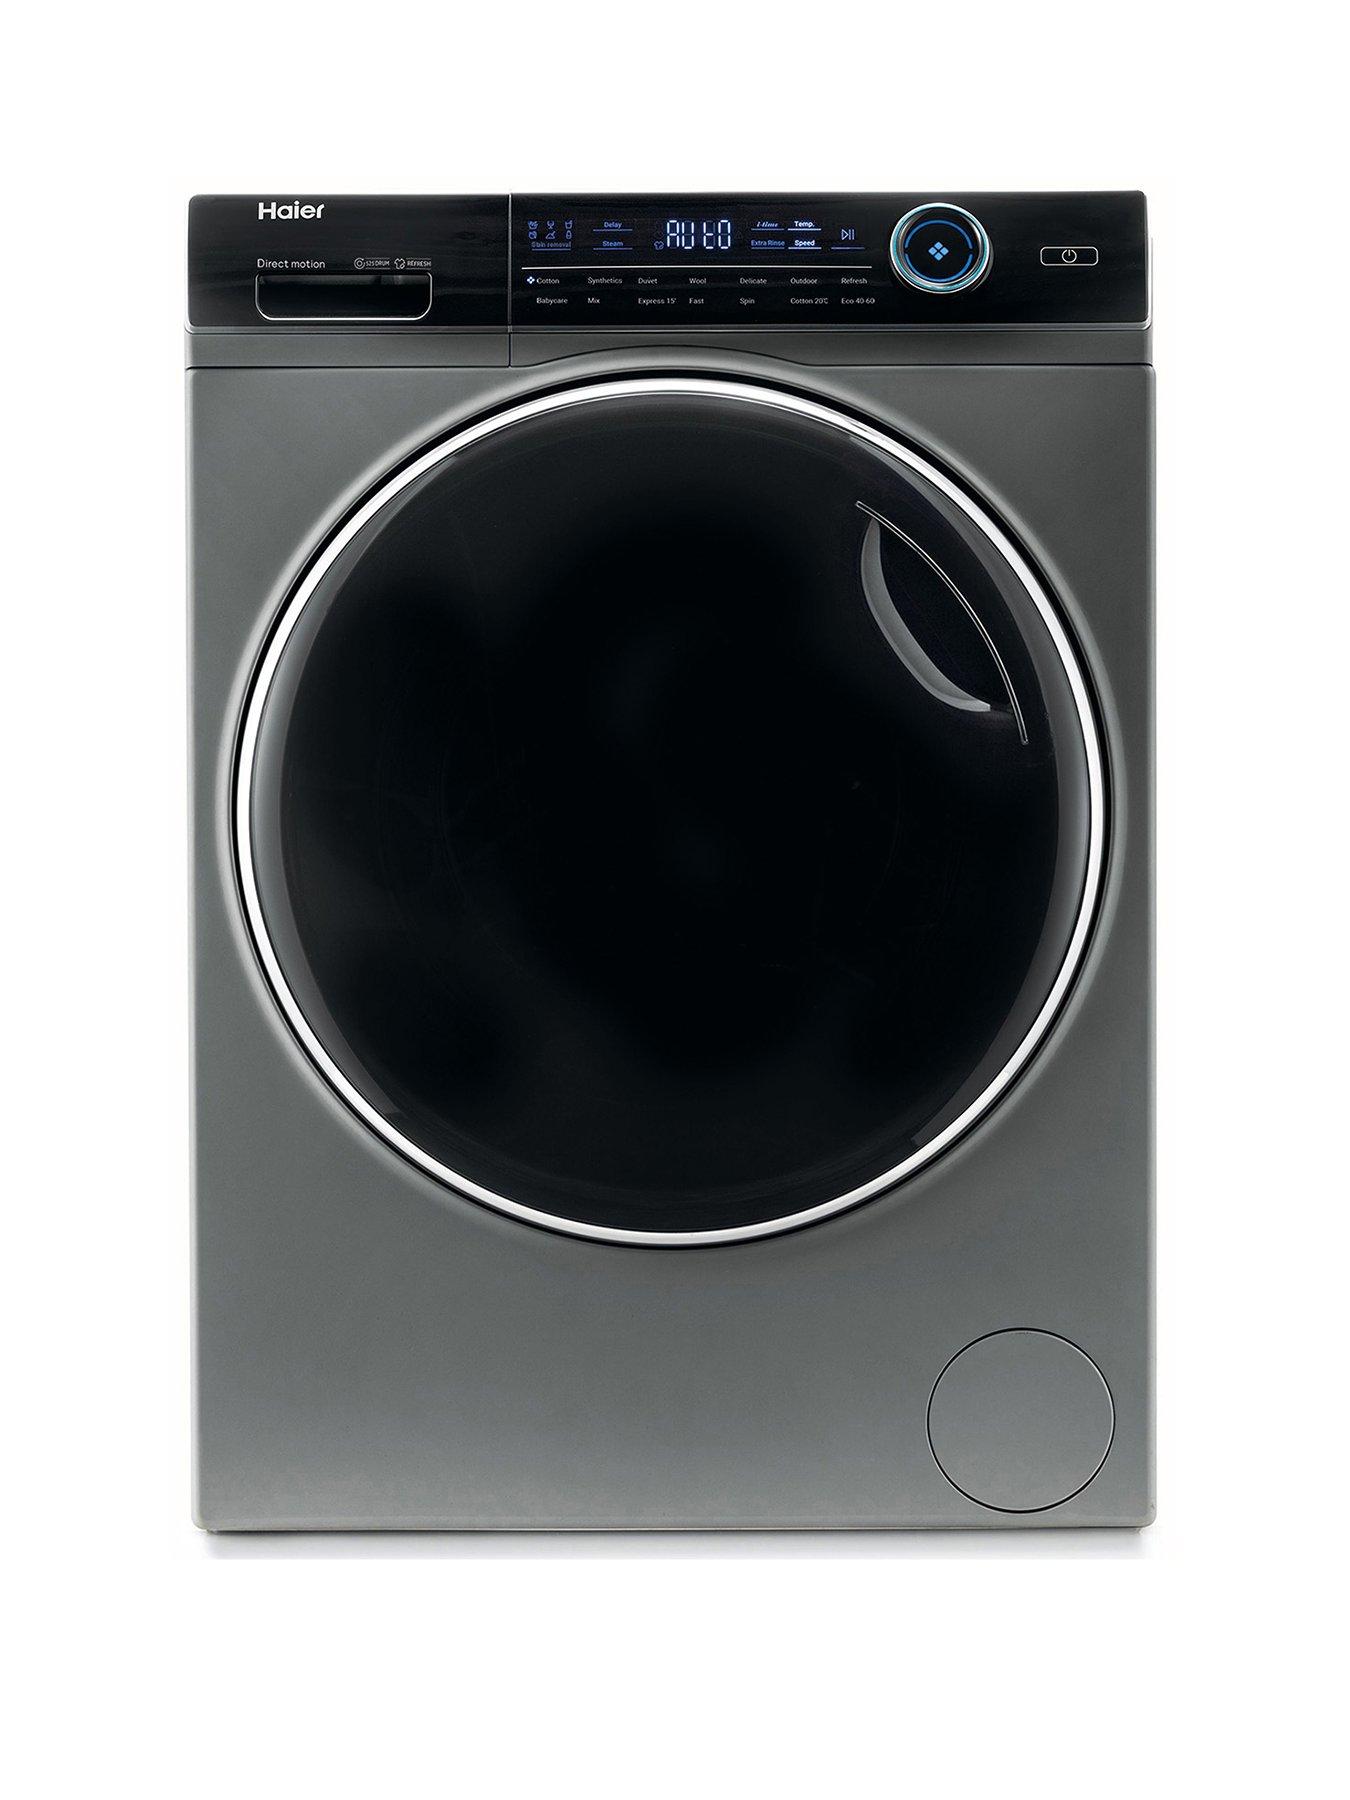 Haier I-Pro Series 7 Hw100-B14979S 10Kg Wash, 1400 Spin Washing Machine, A Rated - Graphite